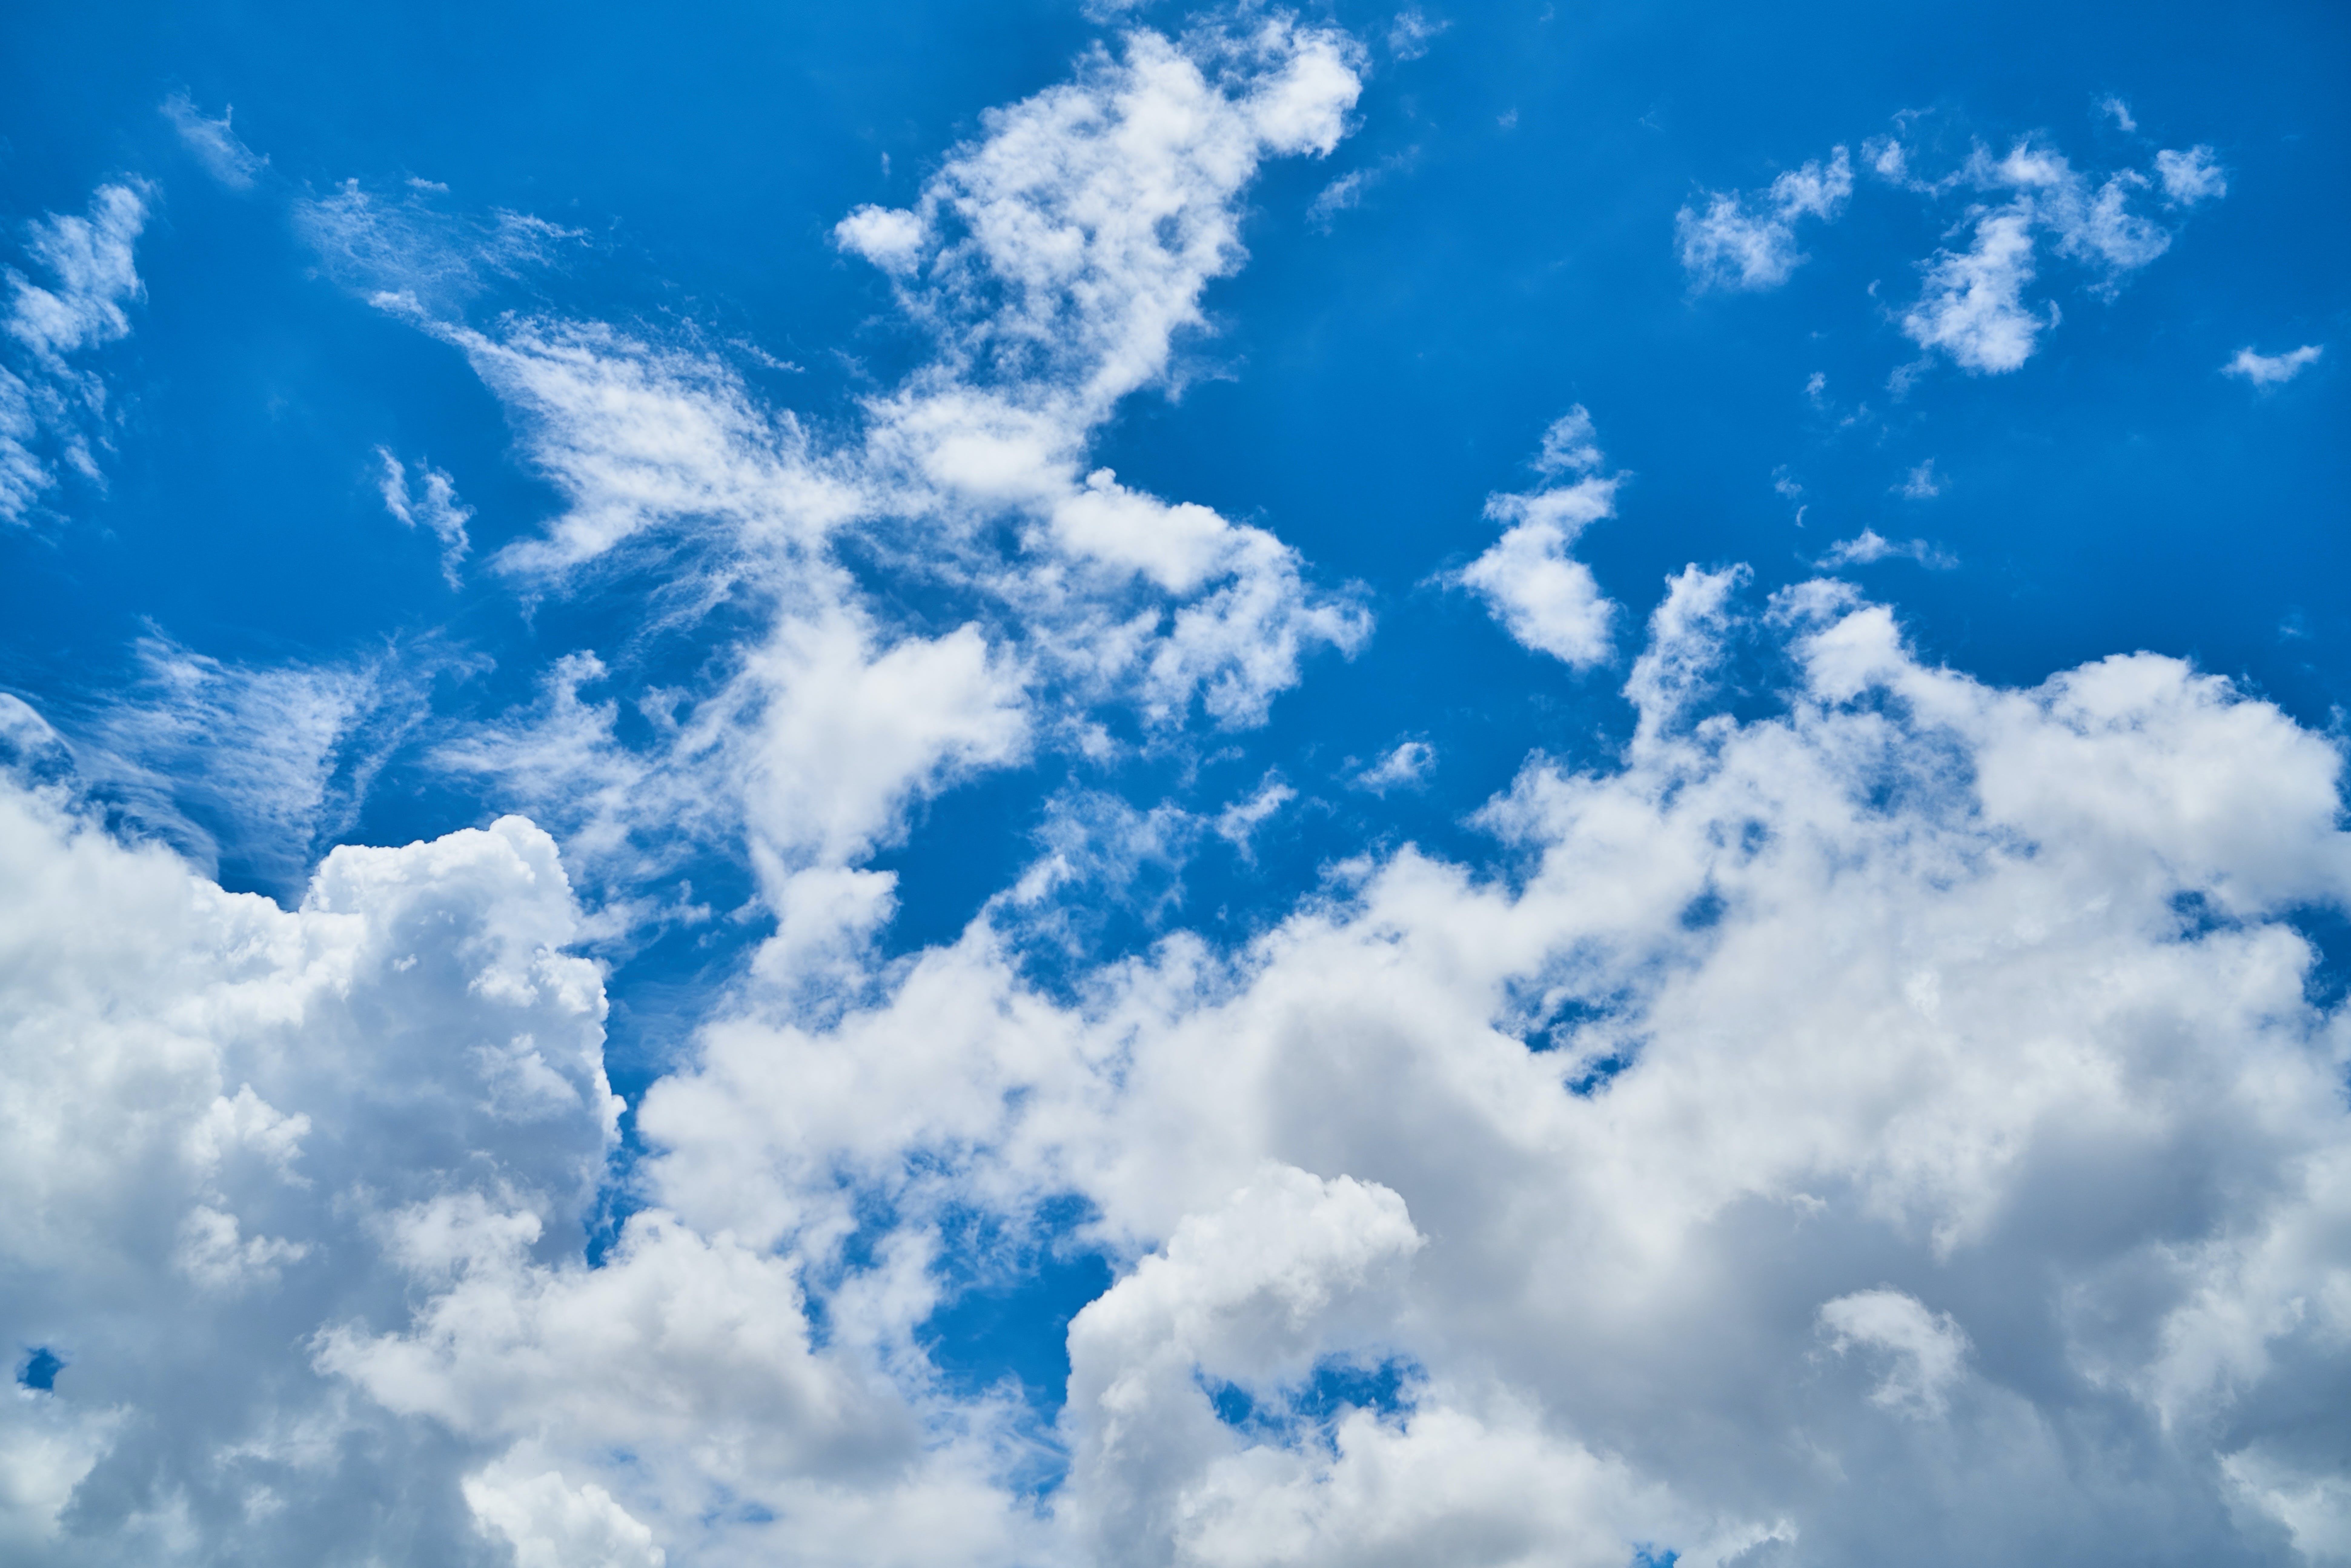 A blue sky with puffy white clouds